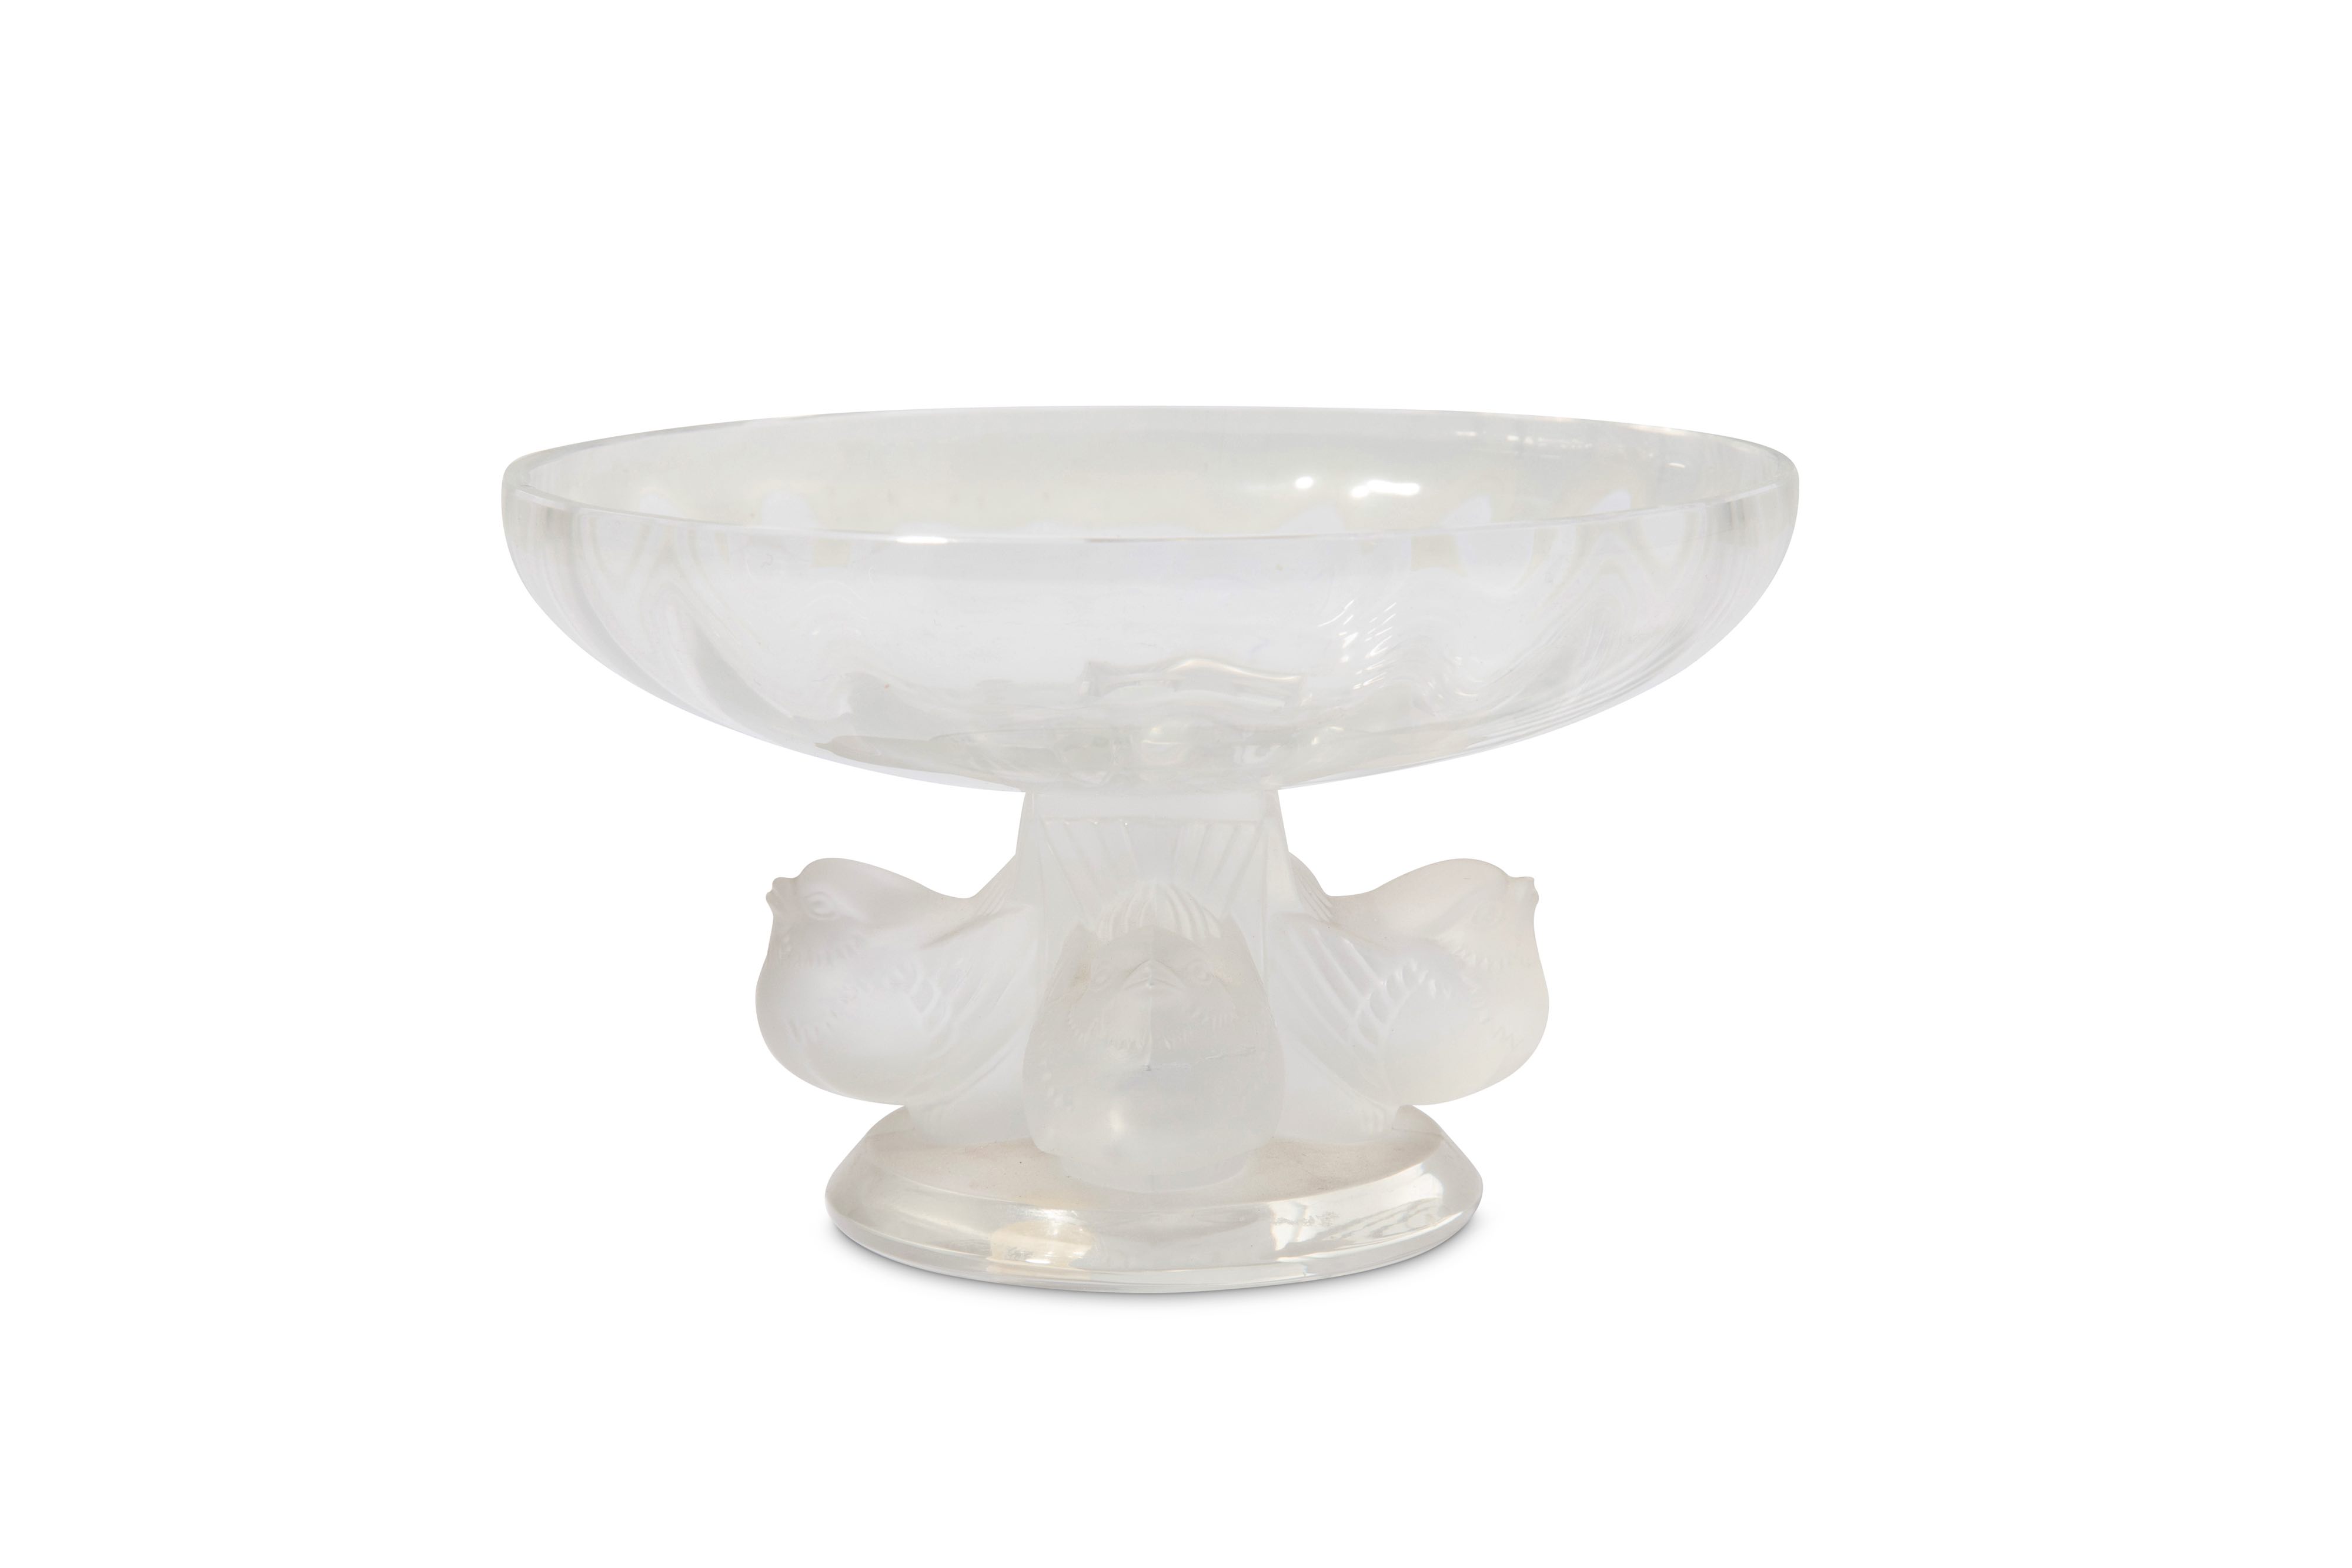 LALIQUE: Lalique Crystal - A 'Nagent' bowl - Image 2 of 3